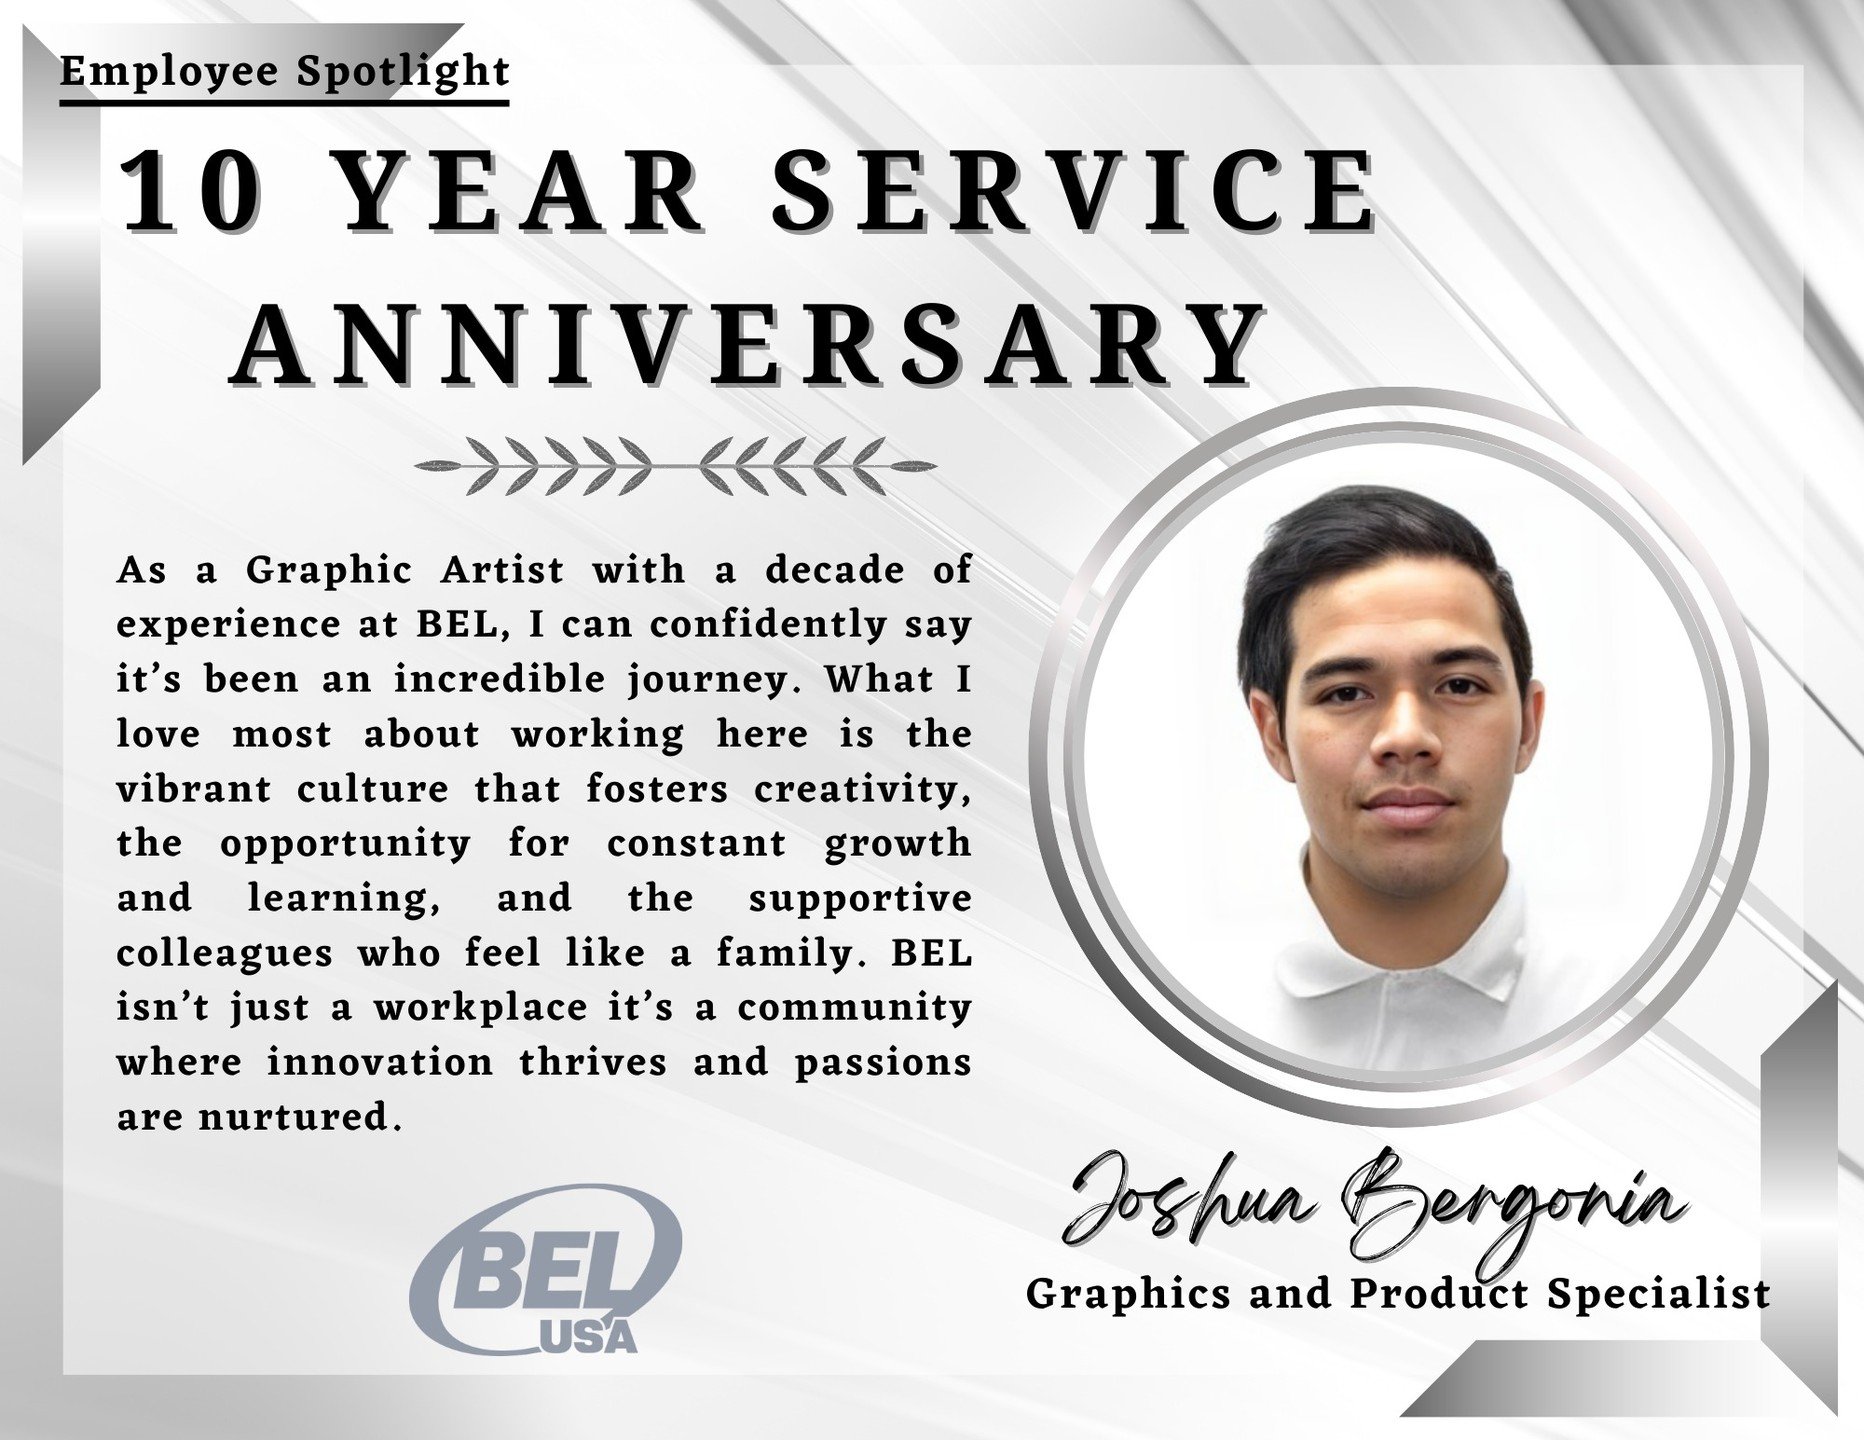 Join us in celebrating a decade of dedication and excellence! 🎉 Today, we're proud to celebrate four incredible individuals who've been with BEL for 10 amazing years! 

🌟 Let's hear it for:
&bull;	Joshua Bergonia - Graphics and Product Specialist
&